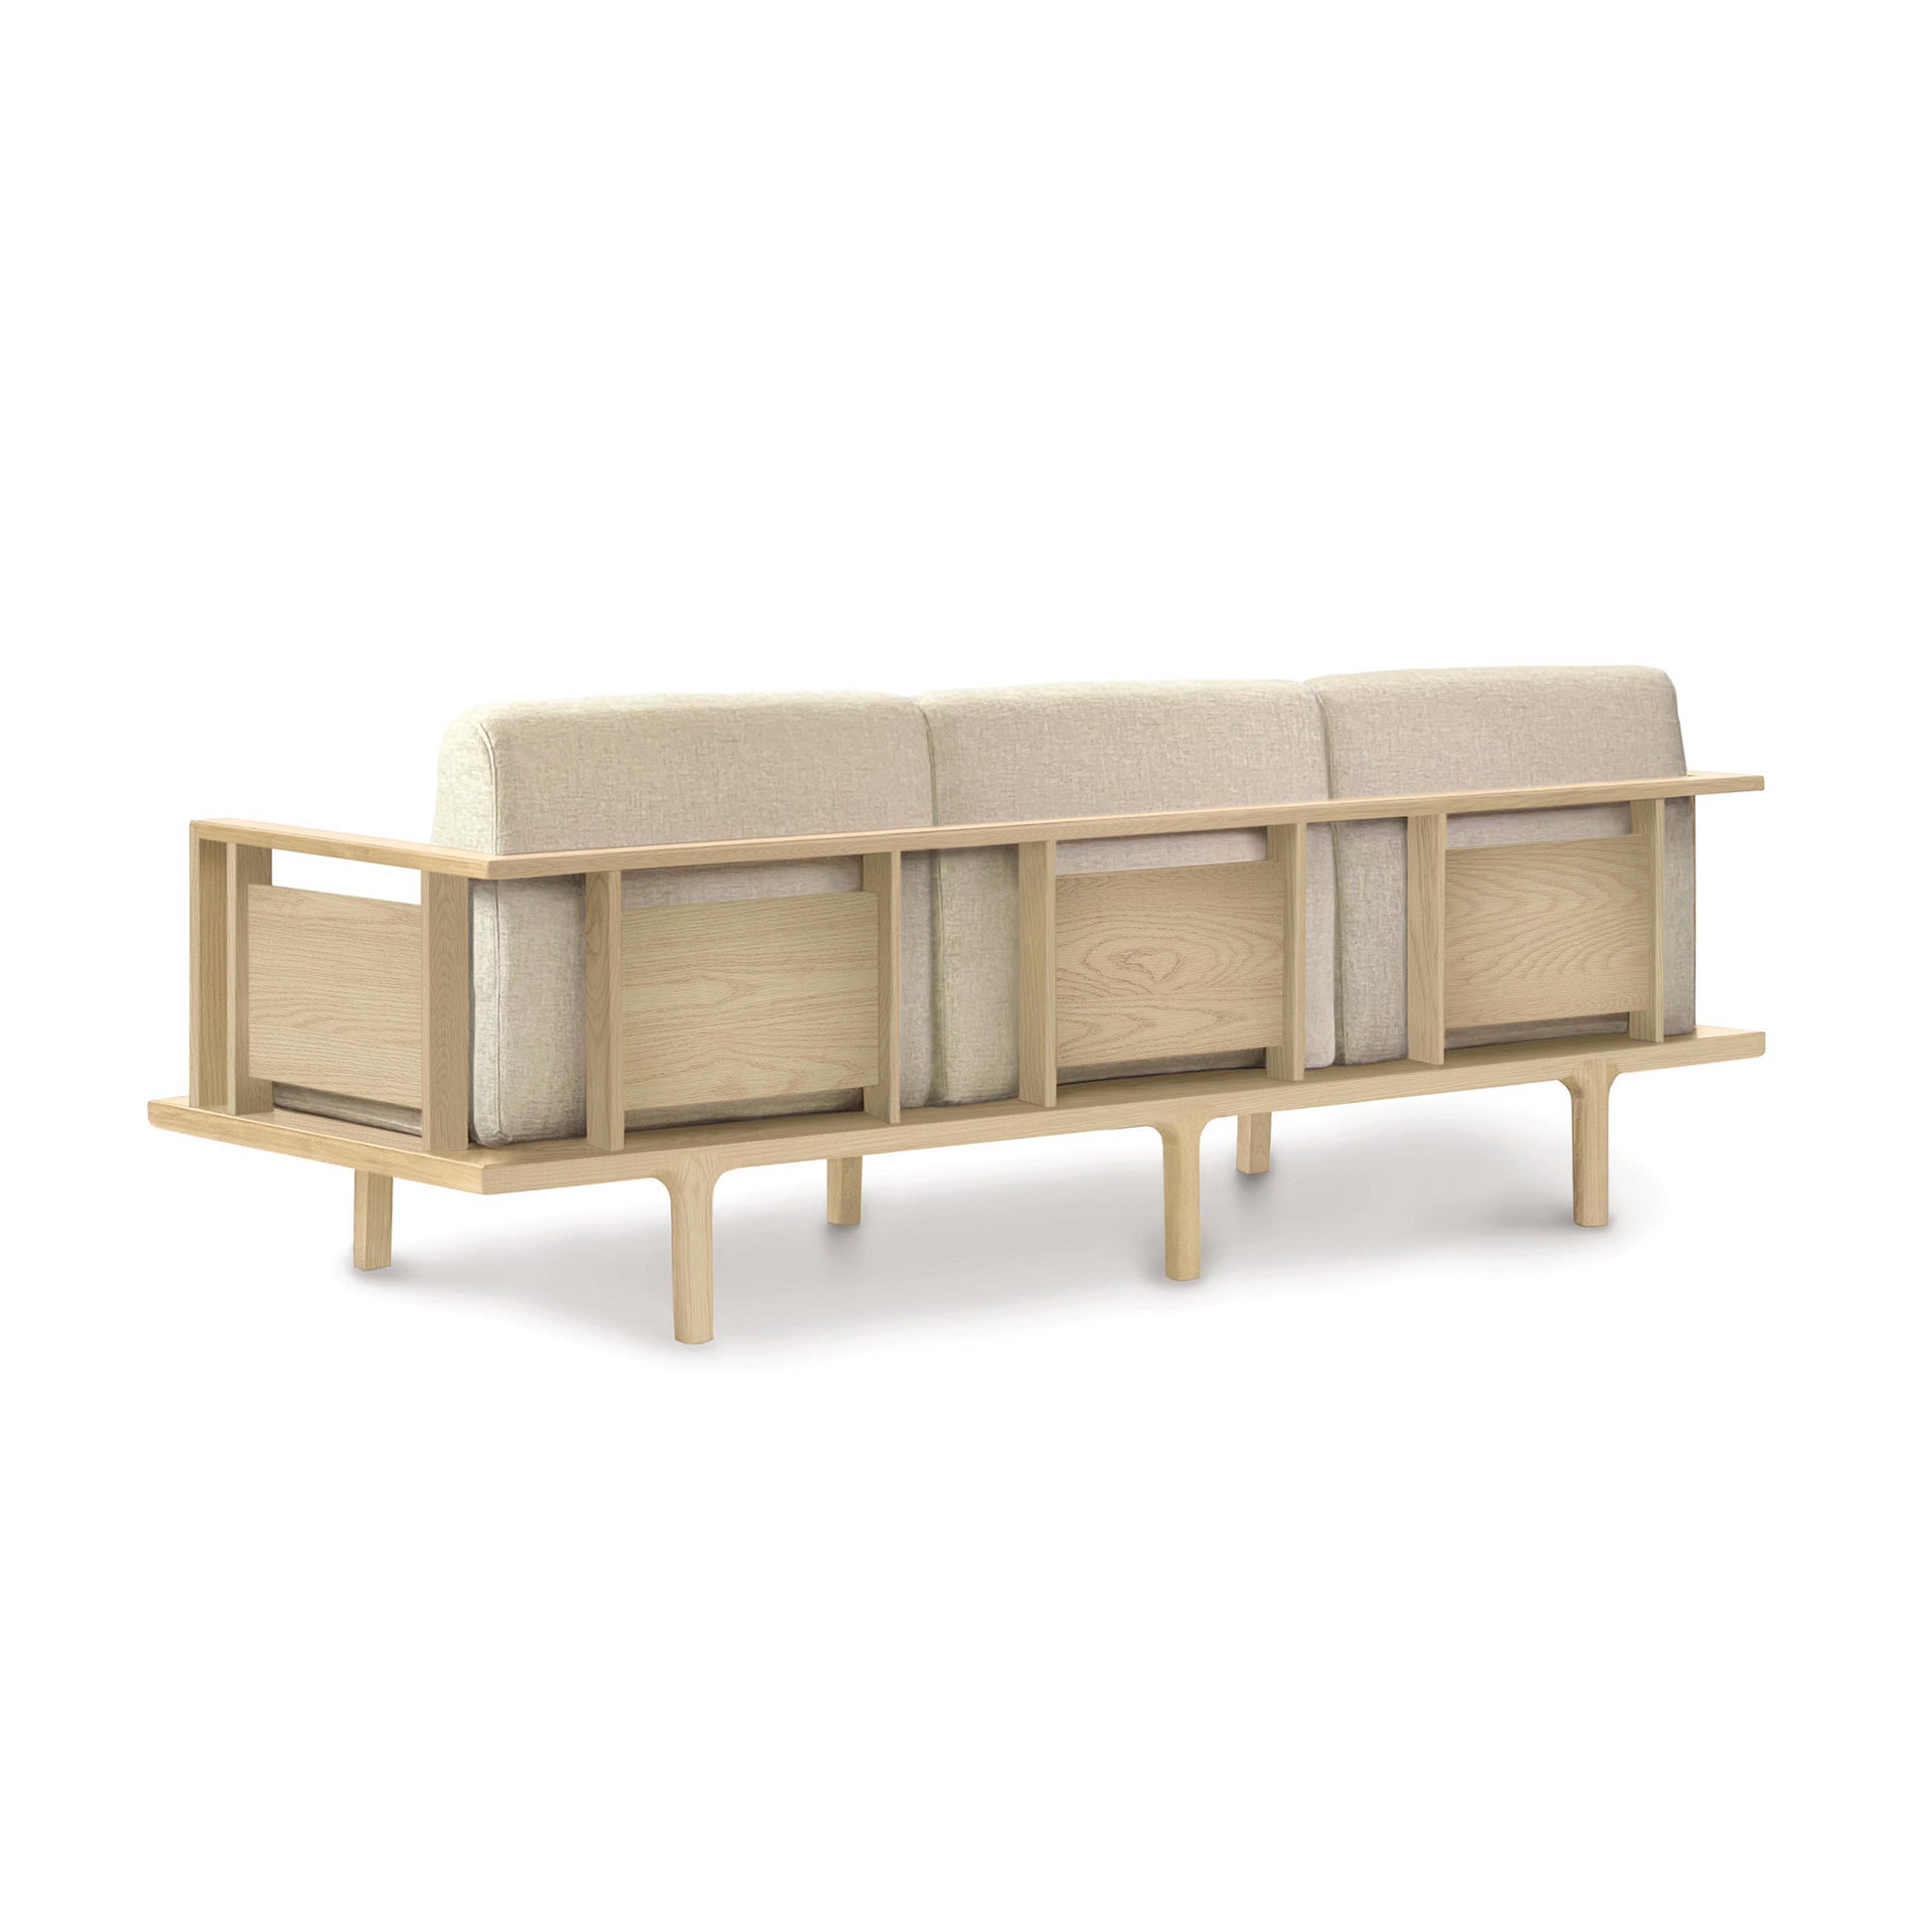 A contemporary Copeland Furniture Sierra Oak Upholstered Sofa with beige cushions and side storage compartments, isolated on a white background.